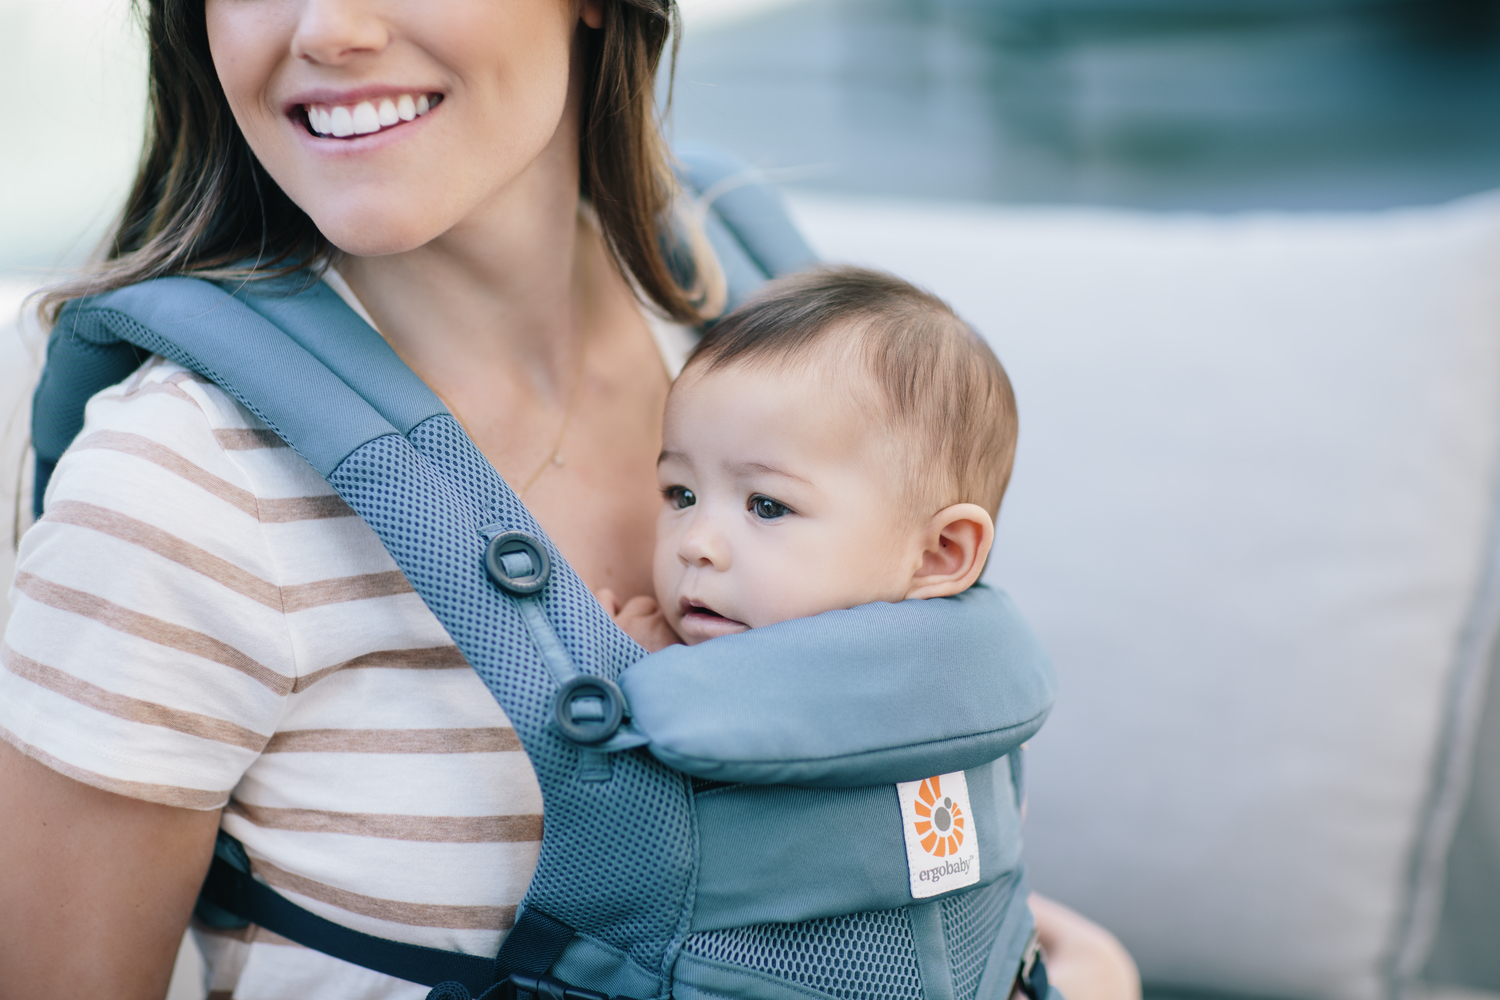 ergobaby omni 360 cool air mesh baby carrier oxford blue